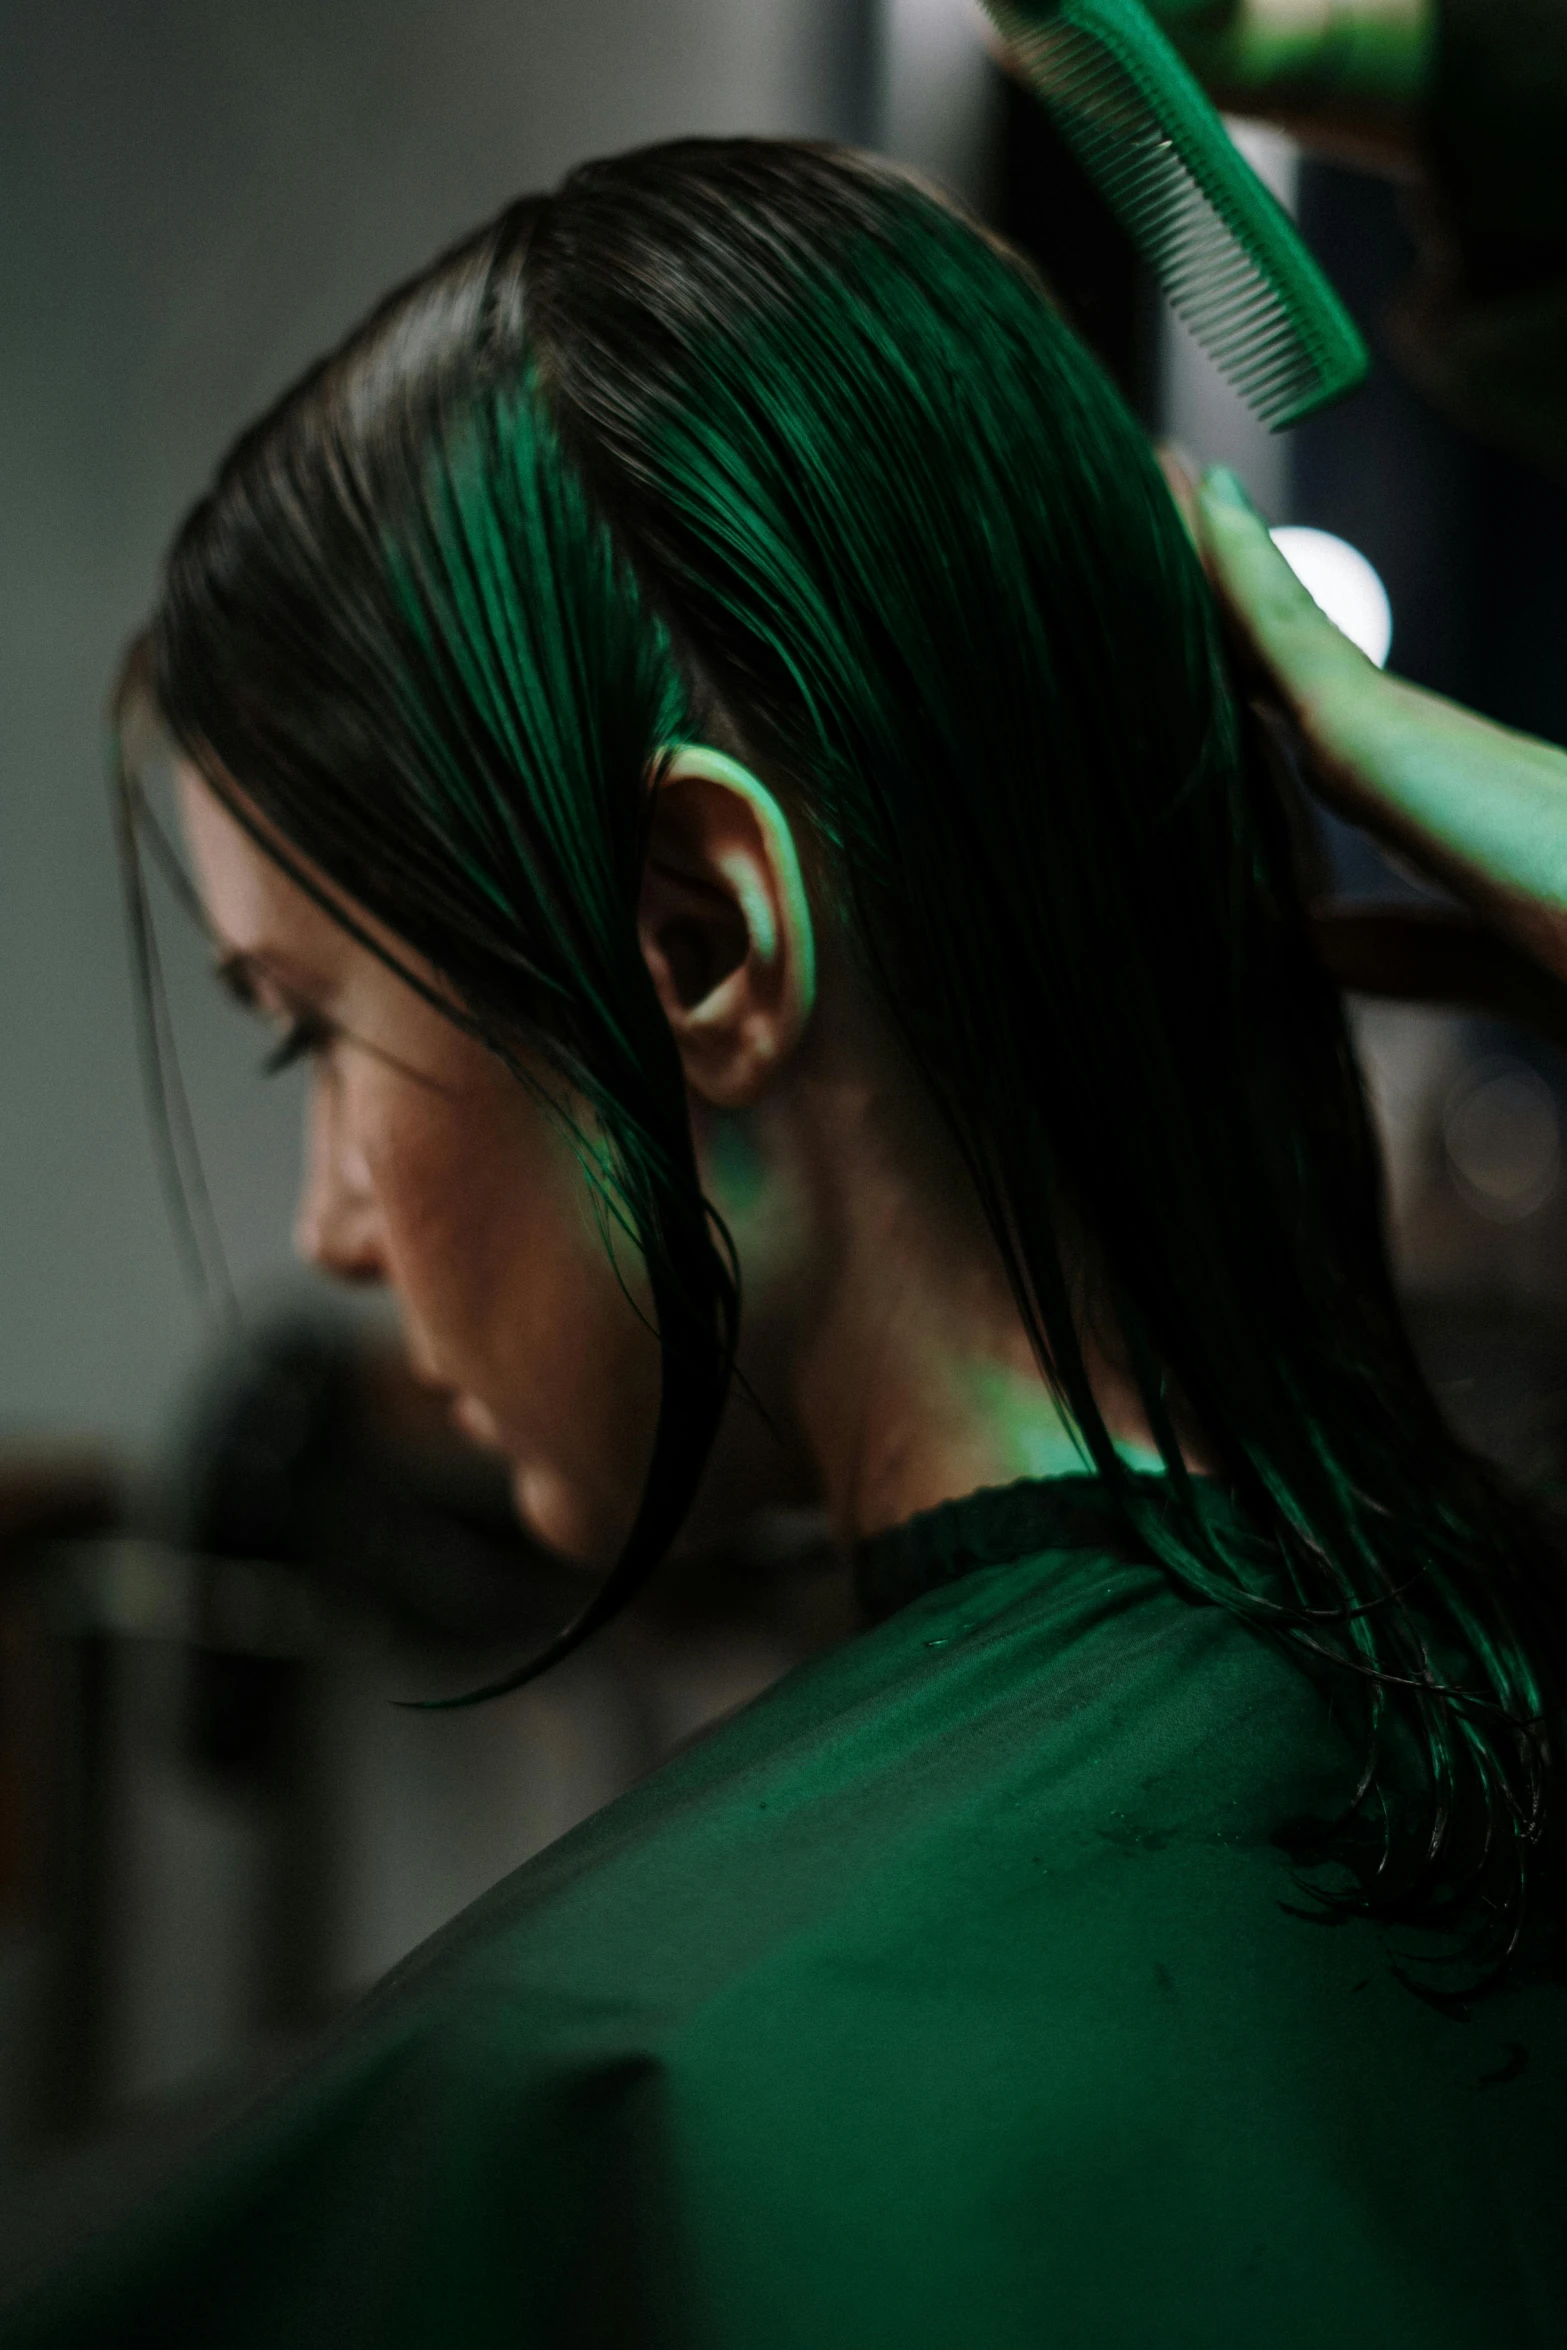 a woman with dark green hair and neon green highlights is getting her hair dyed